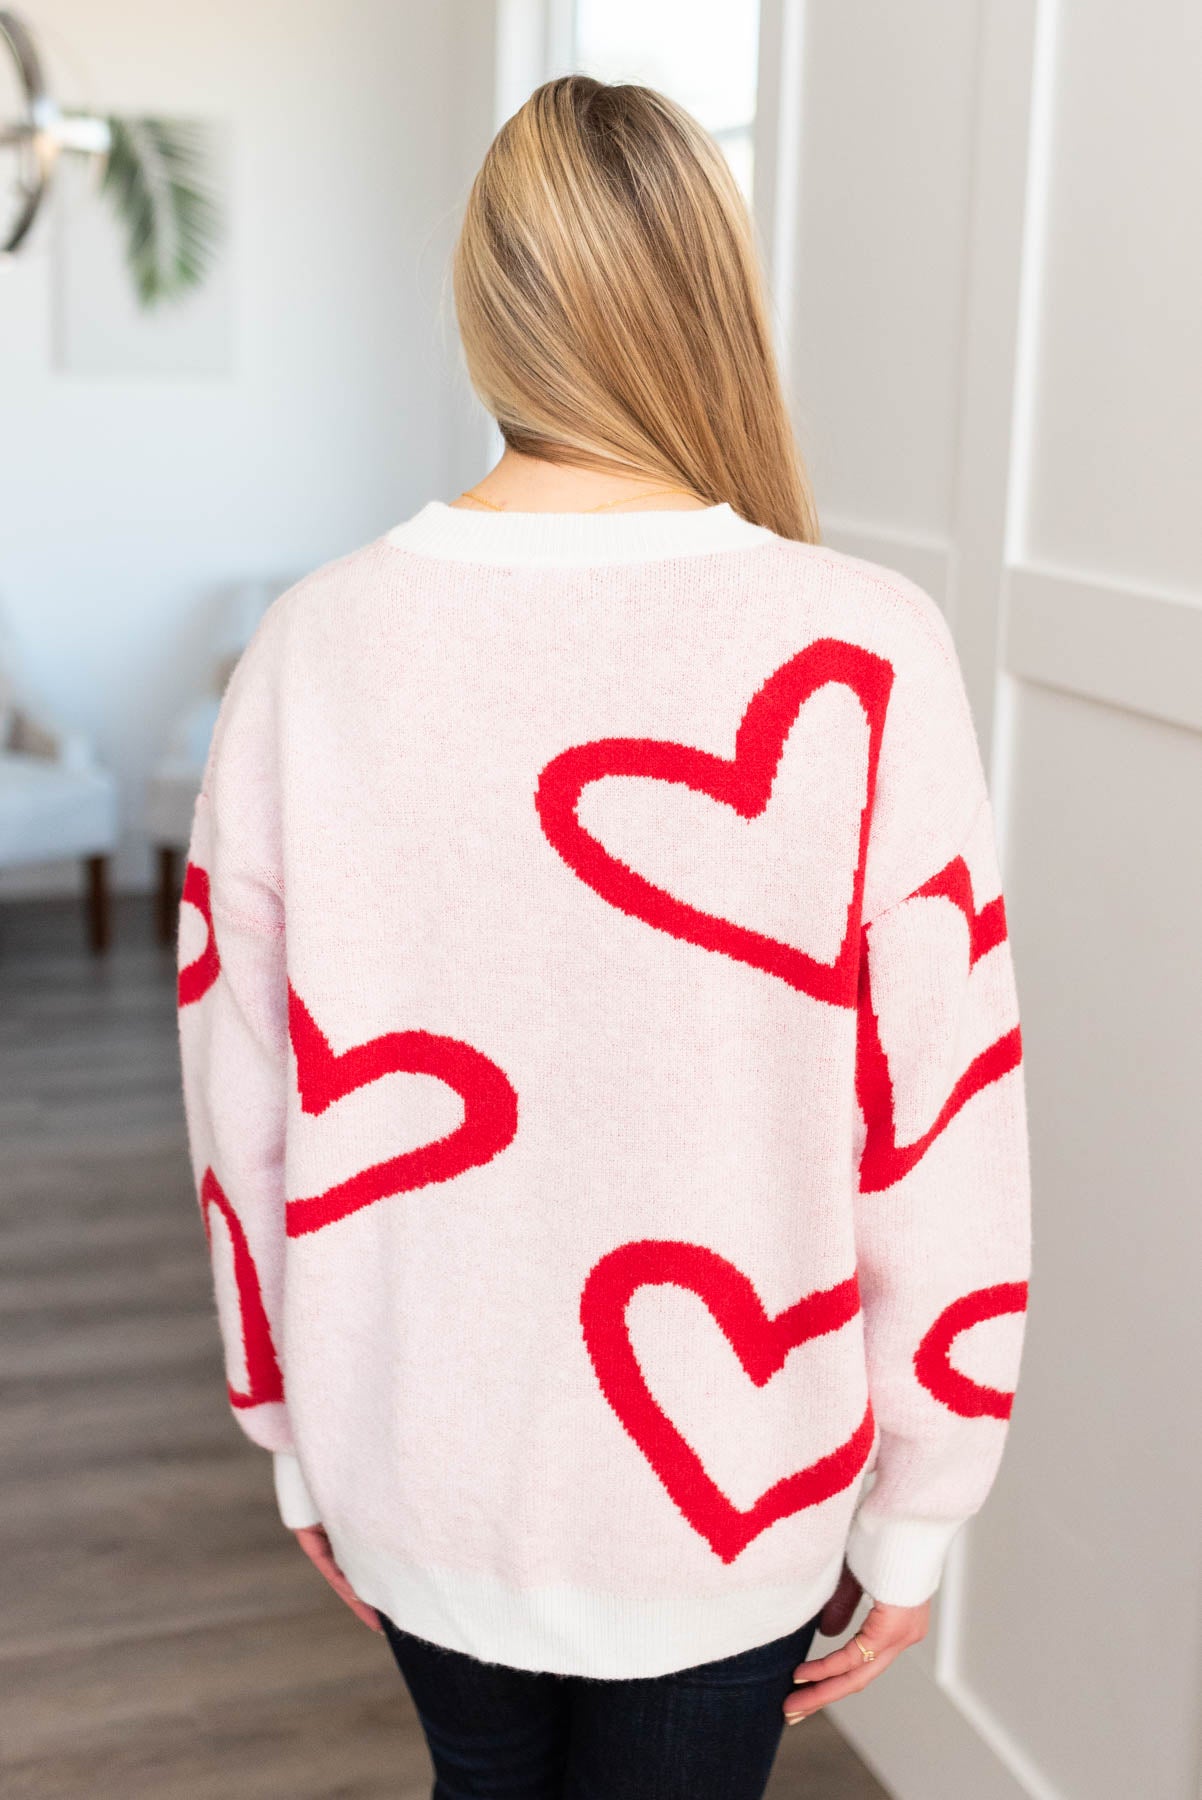 Back view of the red heart sweater